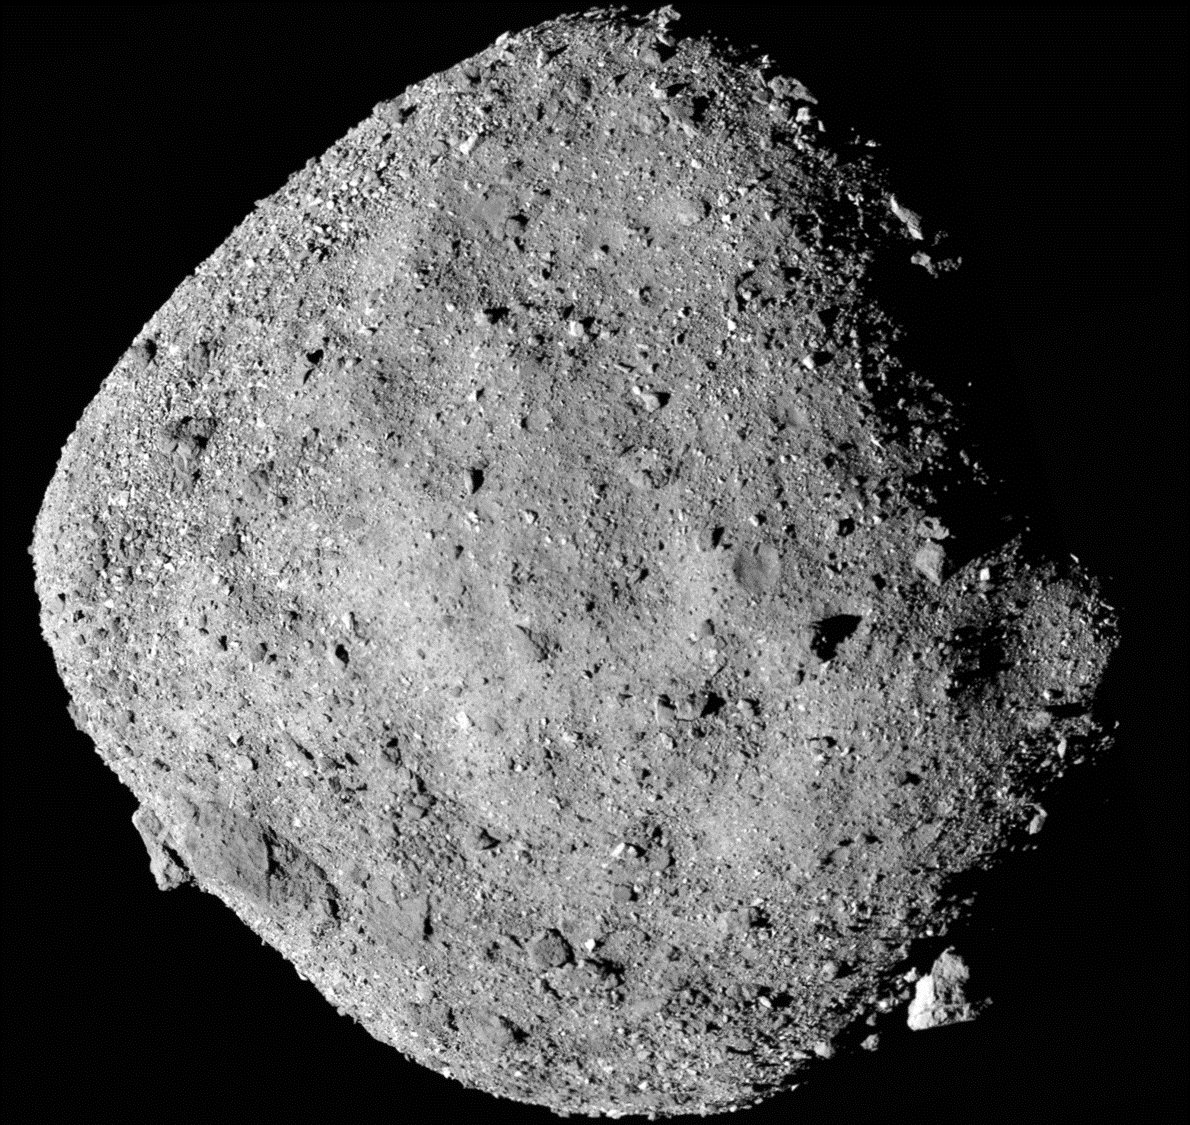 This is a mosaic image of asteroid Bennu, from NASA’s OSIRIS-REx spacecraft.